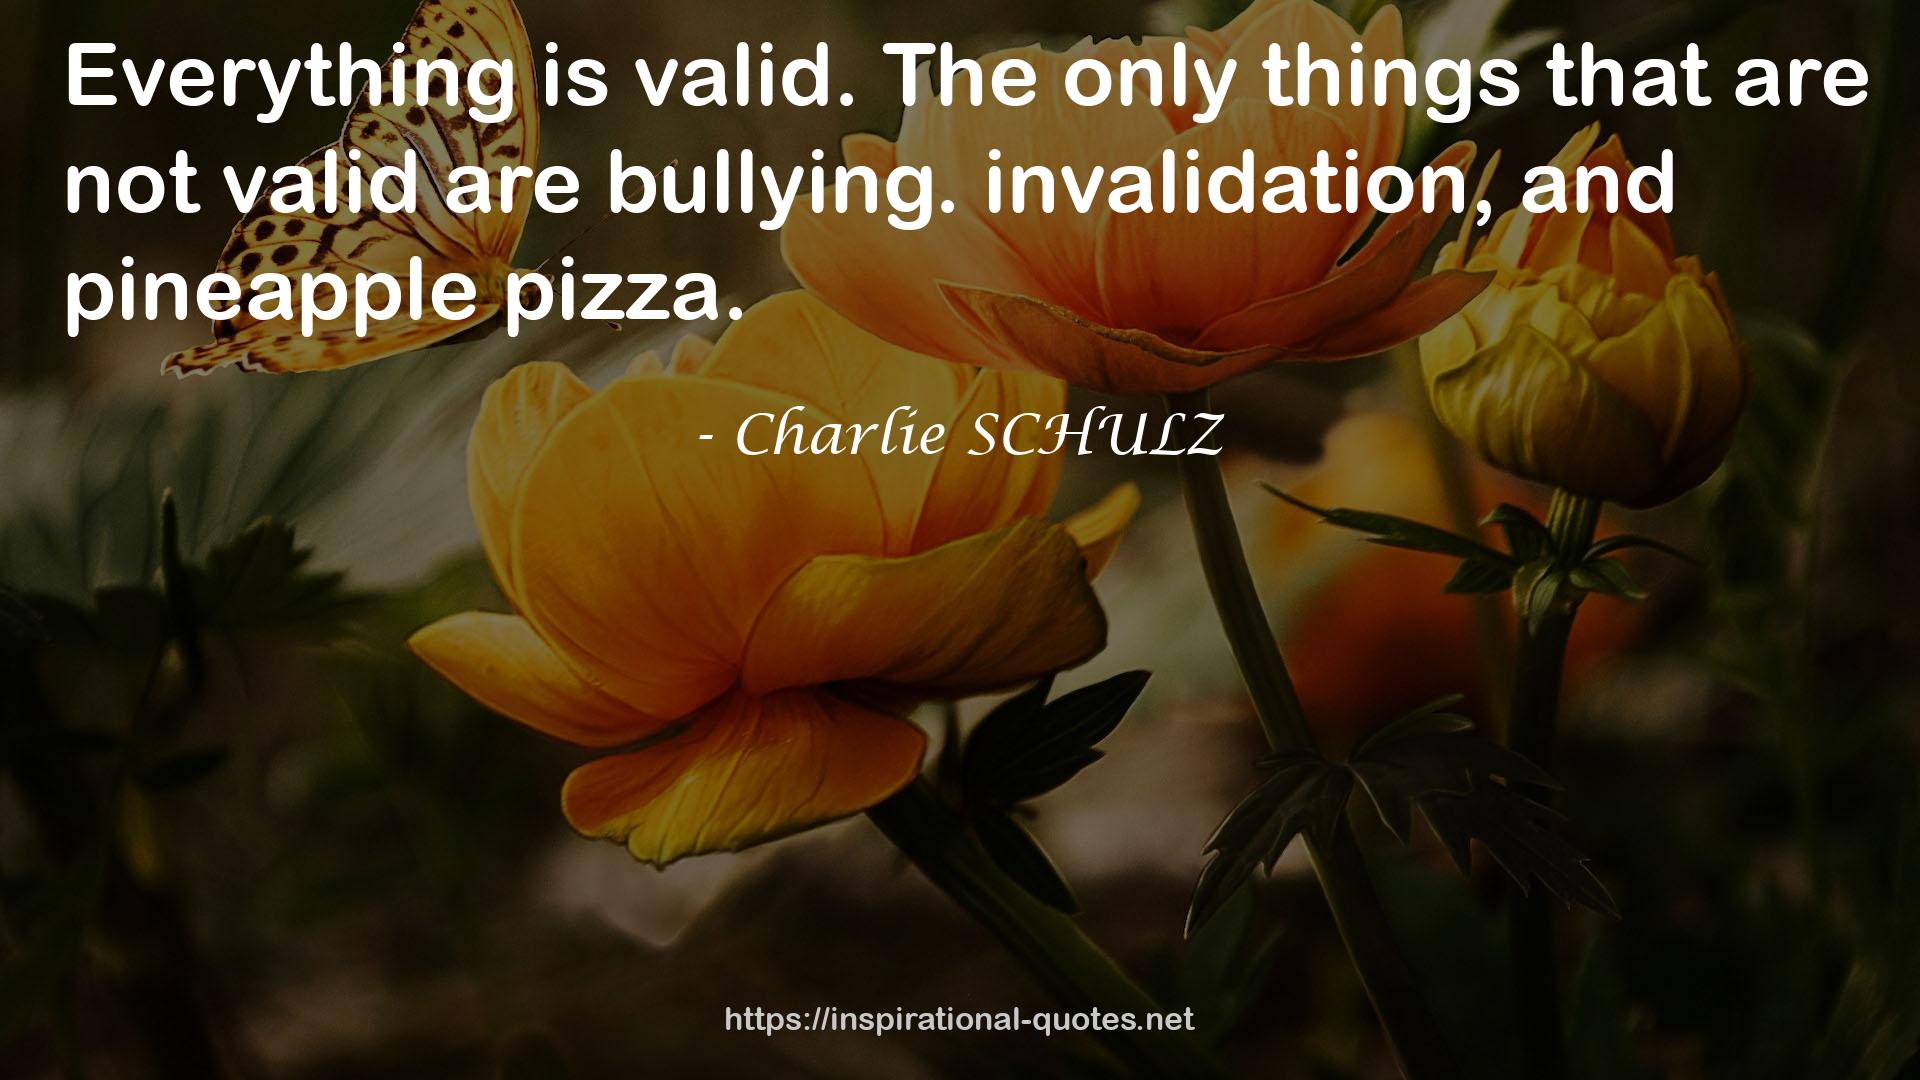 Charlie SCHULZ QUOTES